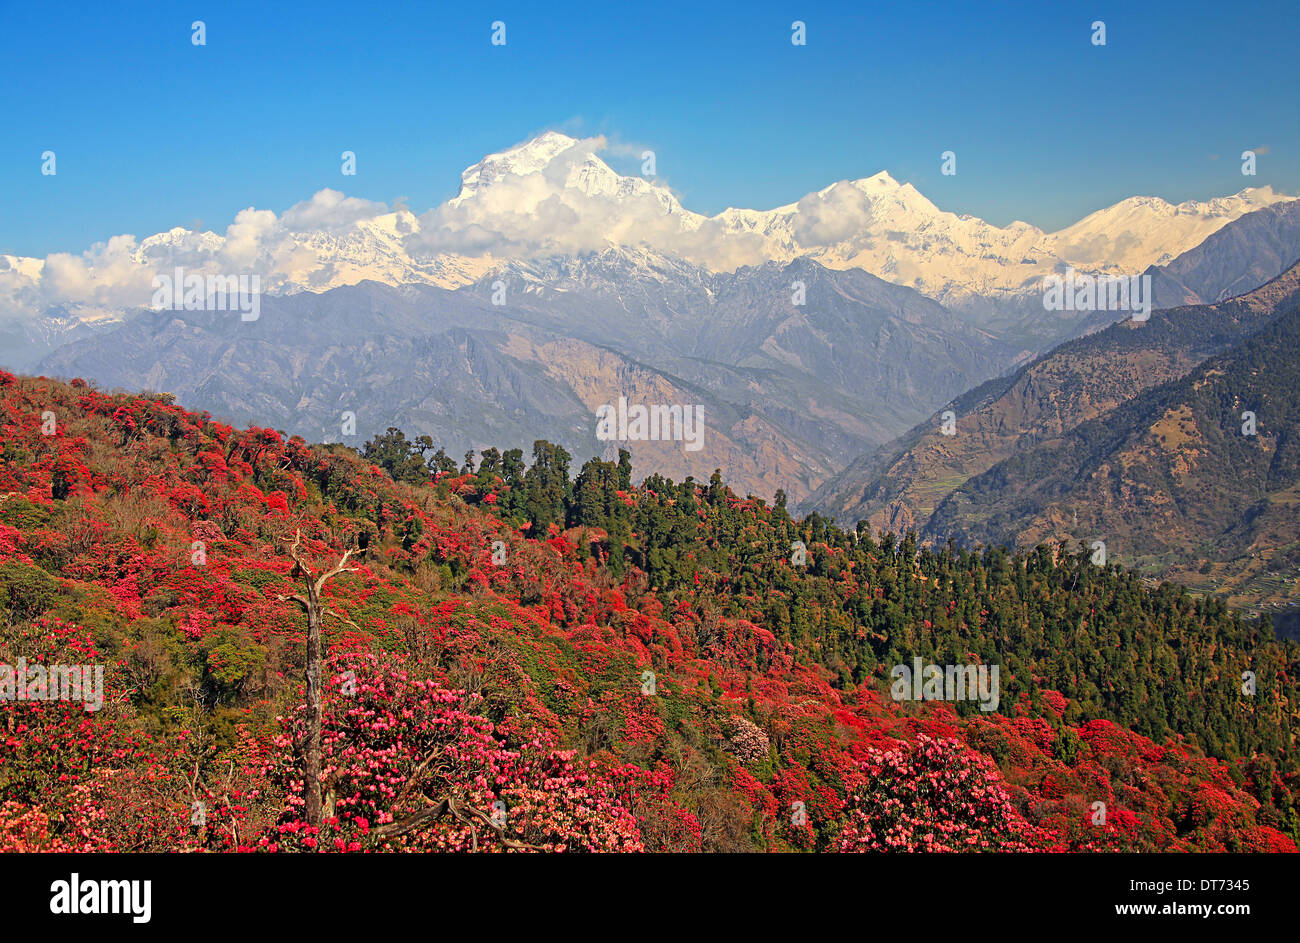 Picturesque view of Dhaulagiri peak (8167 m) with spring blossoming rhododendron forest in the foreground. Canon 5D Mk II. Stock Photo